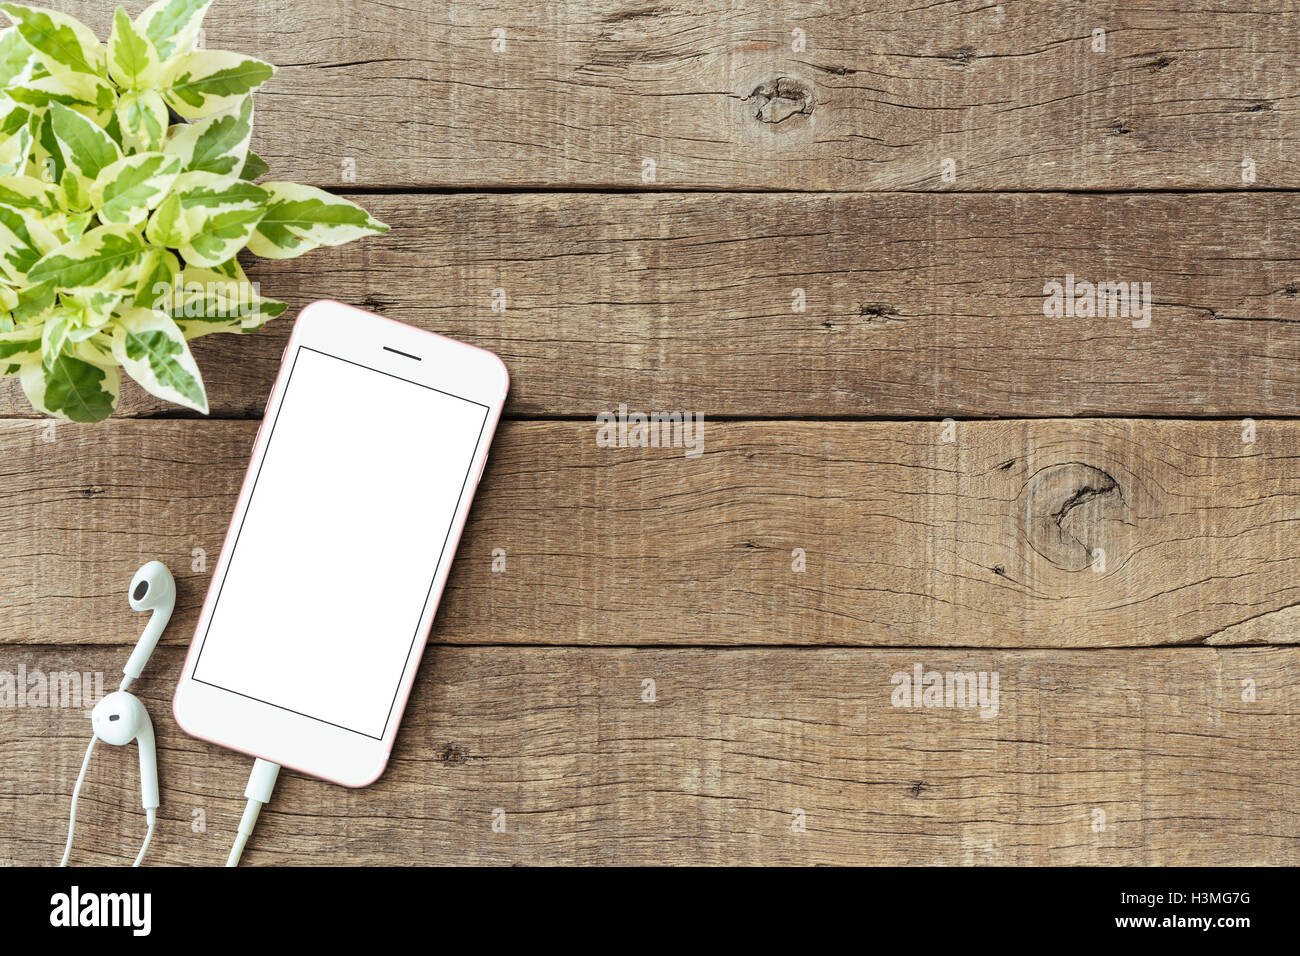 phone blank white screen on old wood table, mockup phone rose gold color Stock Photo